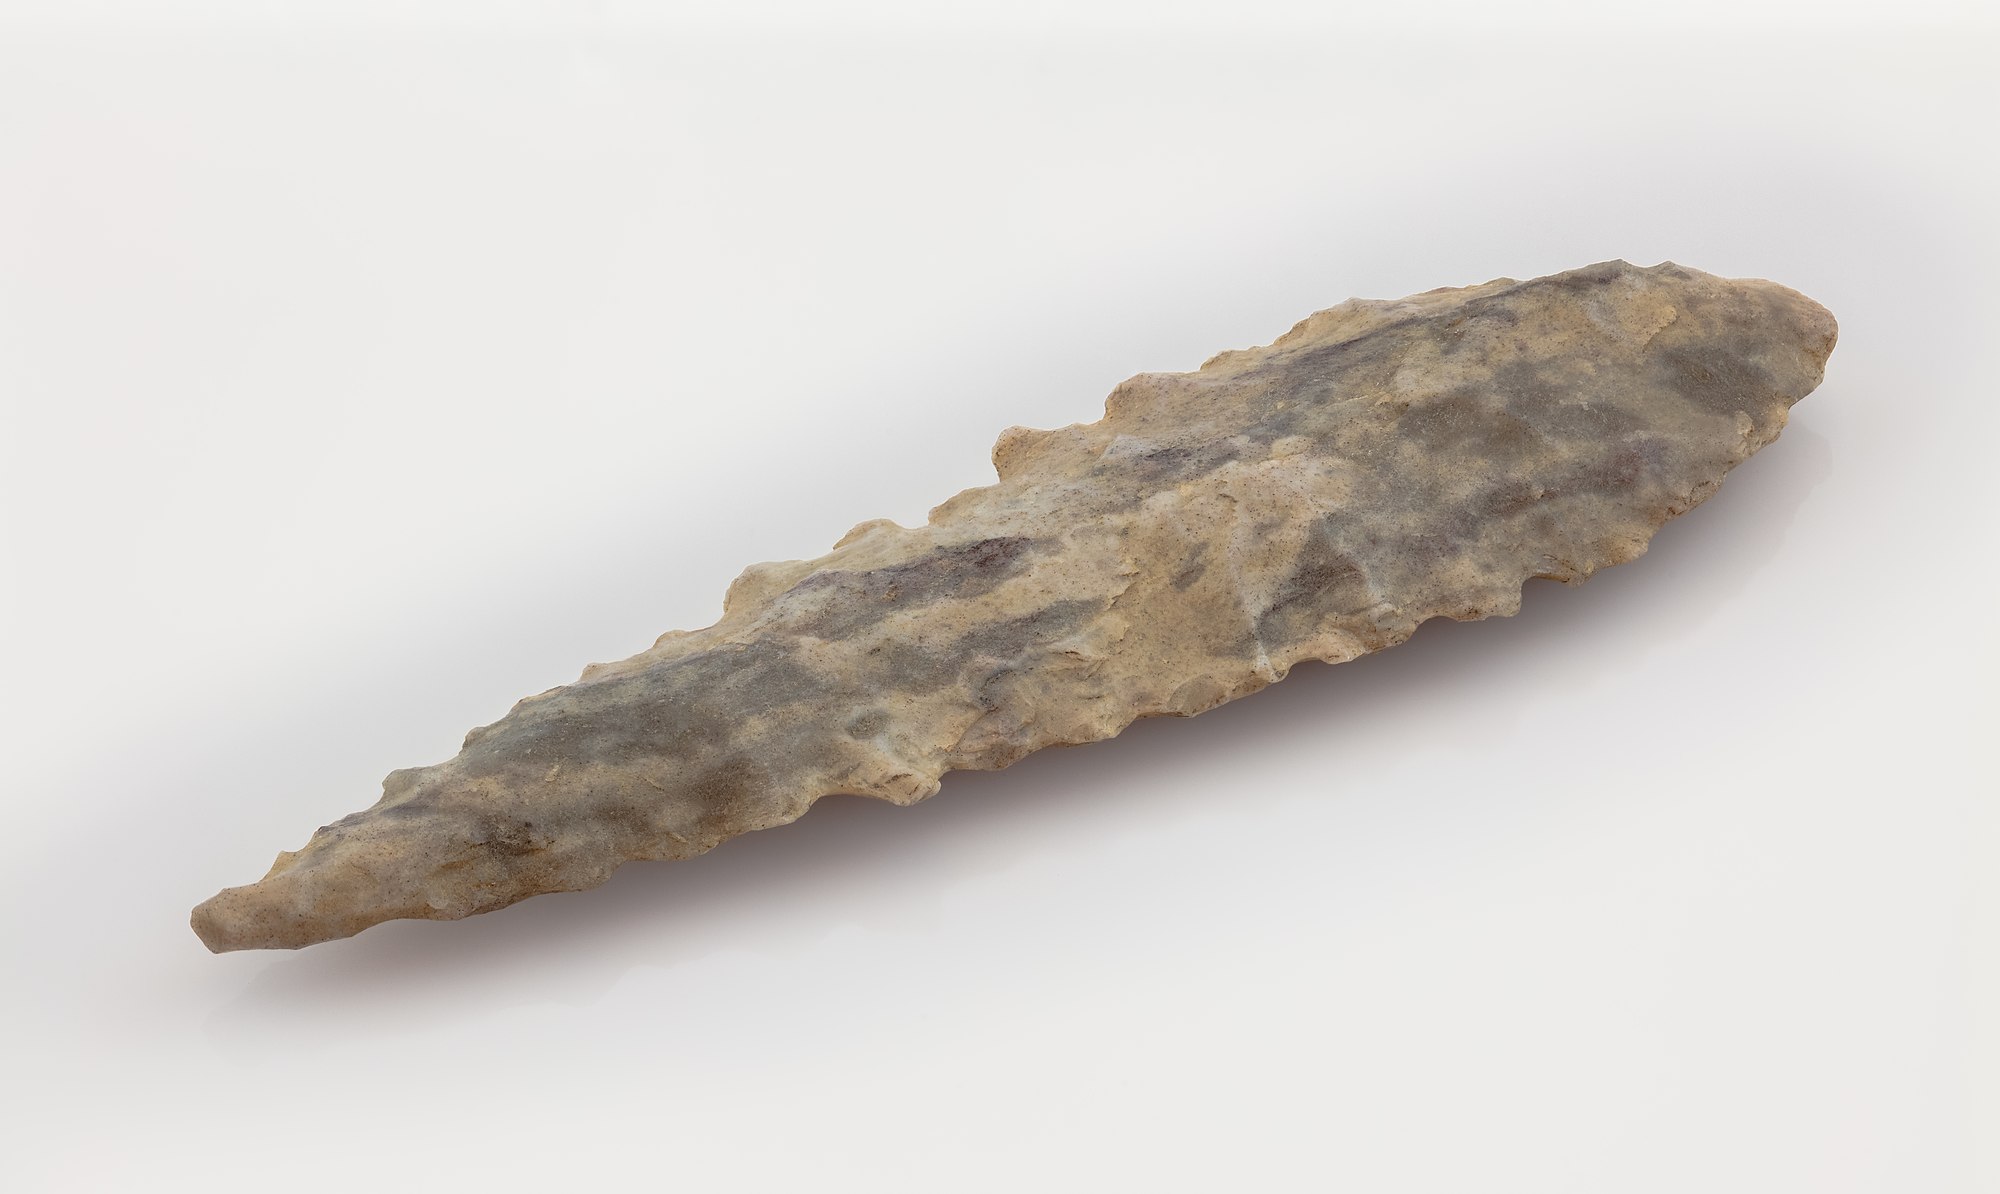 Flint arrowhead from the Neolithic found in the border between Niger and Mali.